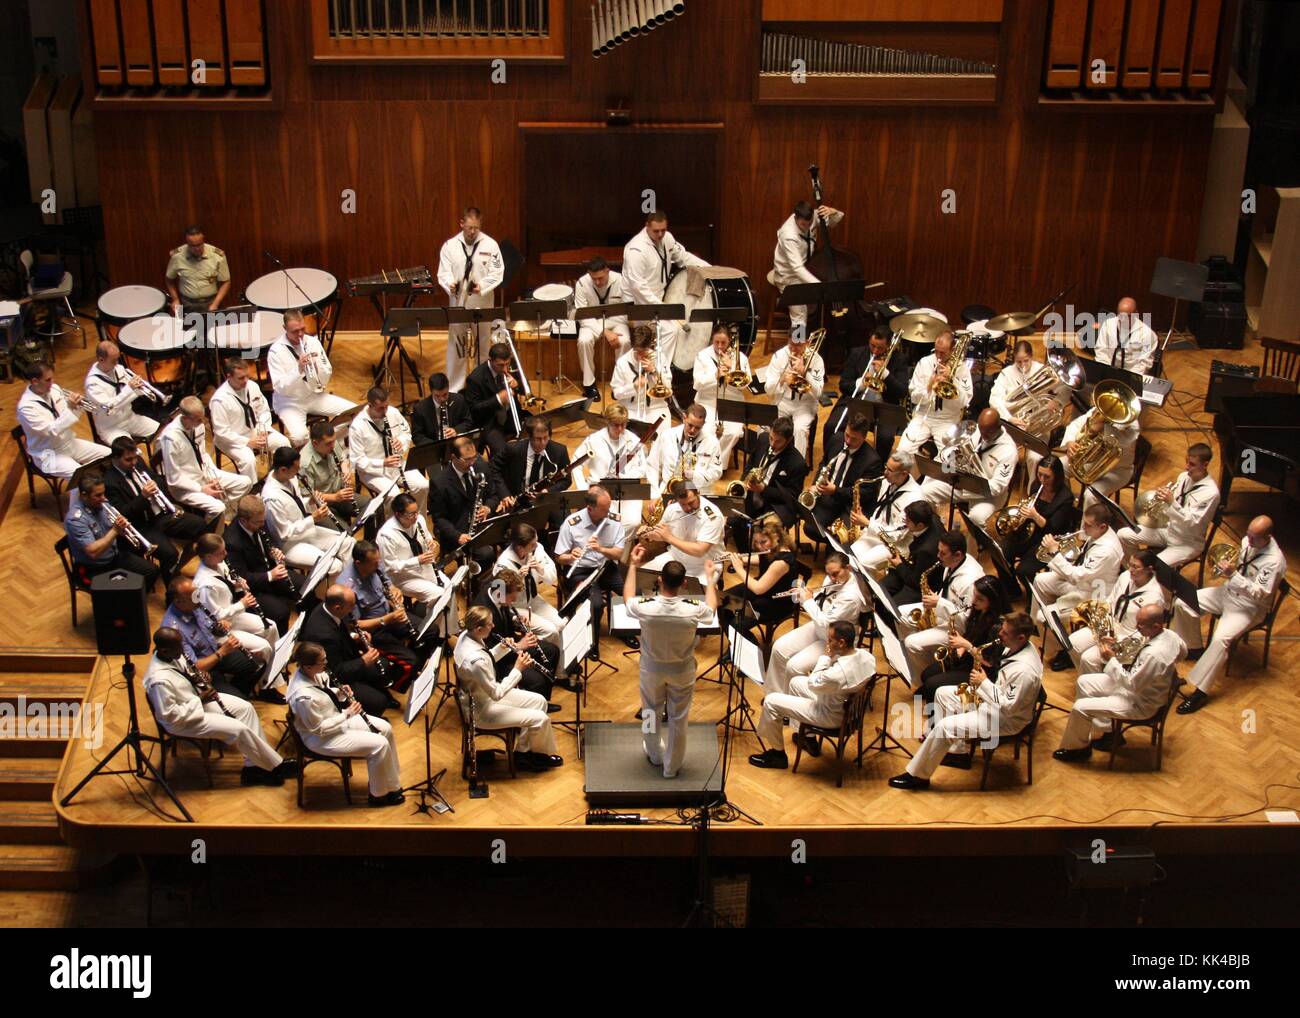 Students from the Naples Conservatory of Music, Naples, Italy, 2012. Image courtesy U.S. Navy photo/US Navy. Stock Photo